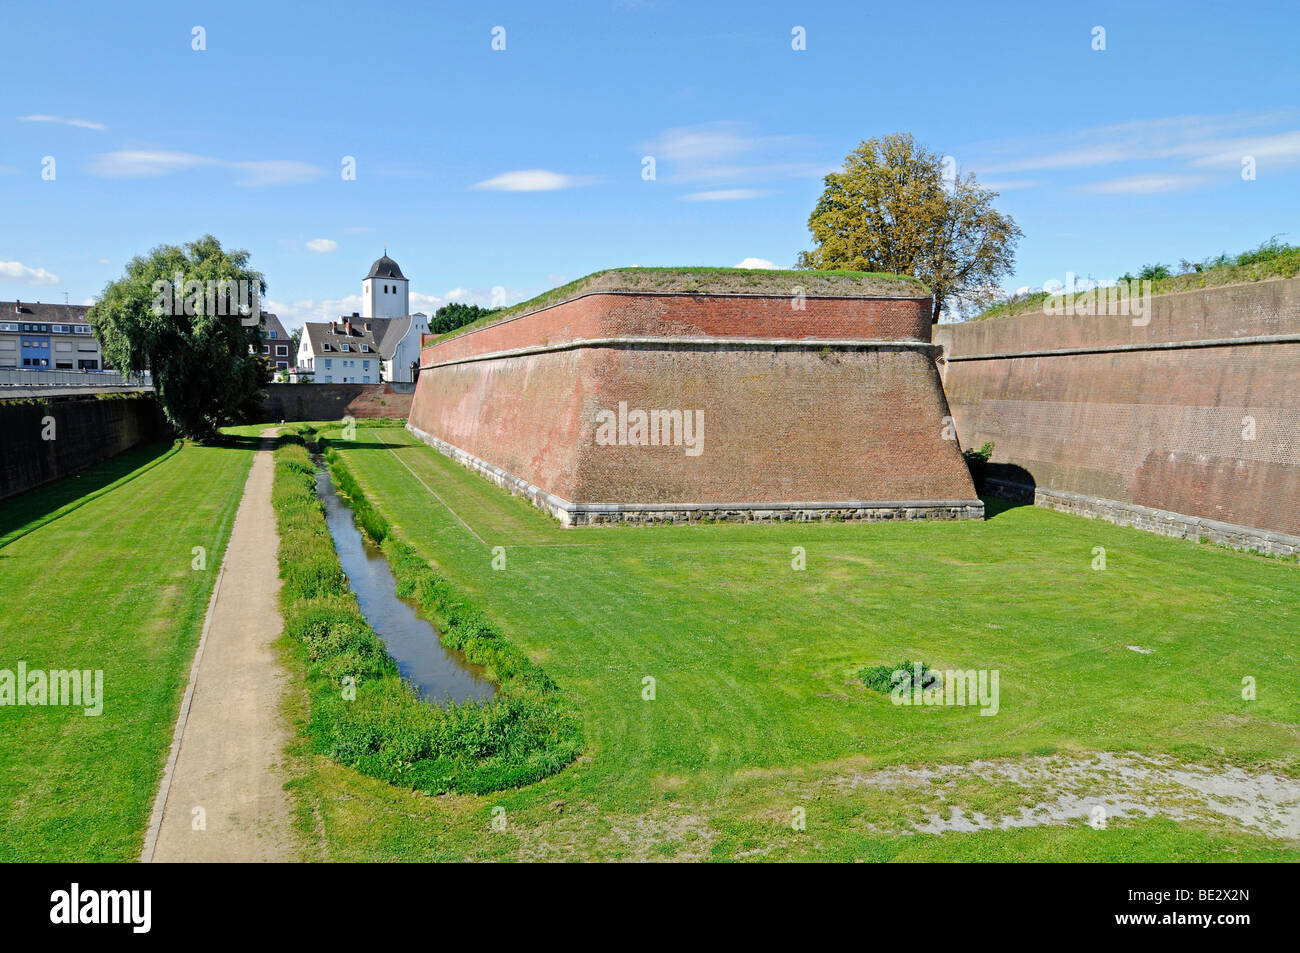 Citadel, fortress, architectural monument, school, museum, Juelich, Dueren district, North Rhine-Westphalia, Germany, Europe Stock Photo